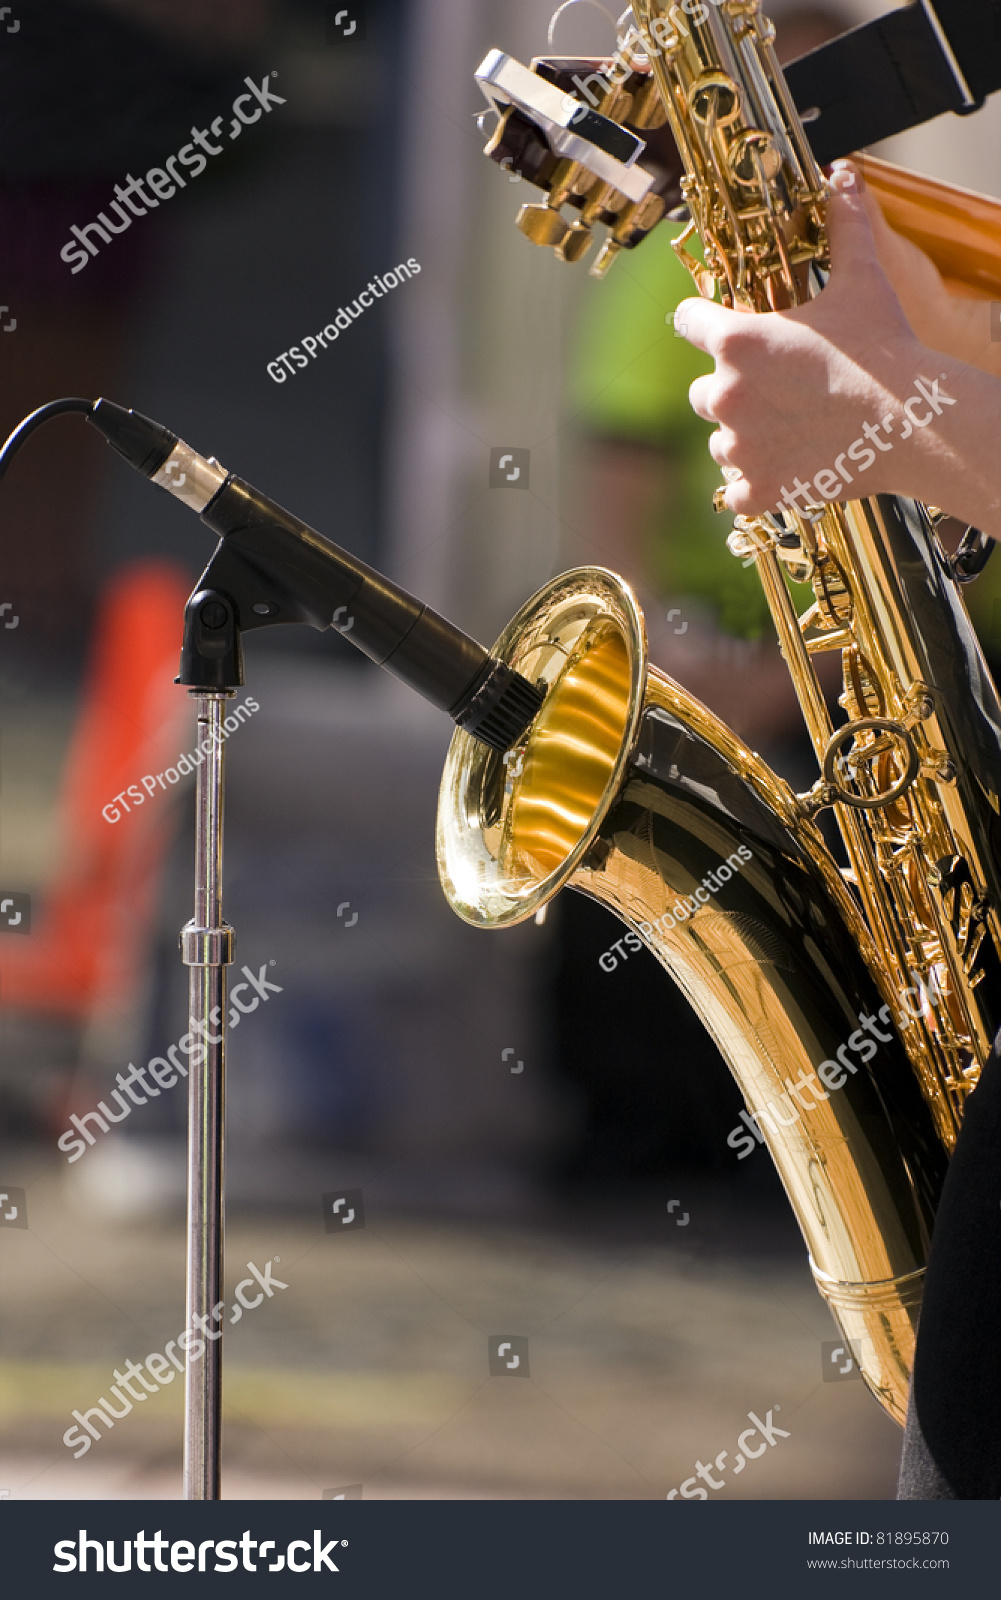 Tenor Sax Musician Holding The Instrument At The Microphone Stock Photo ...